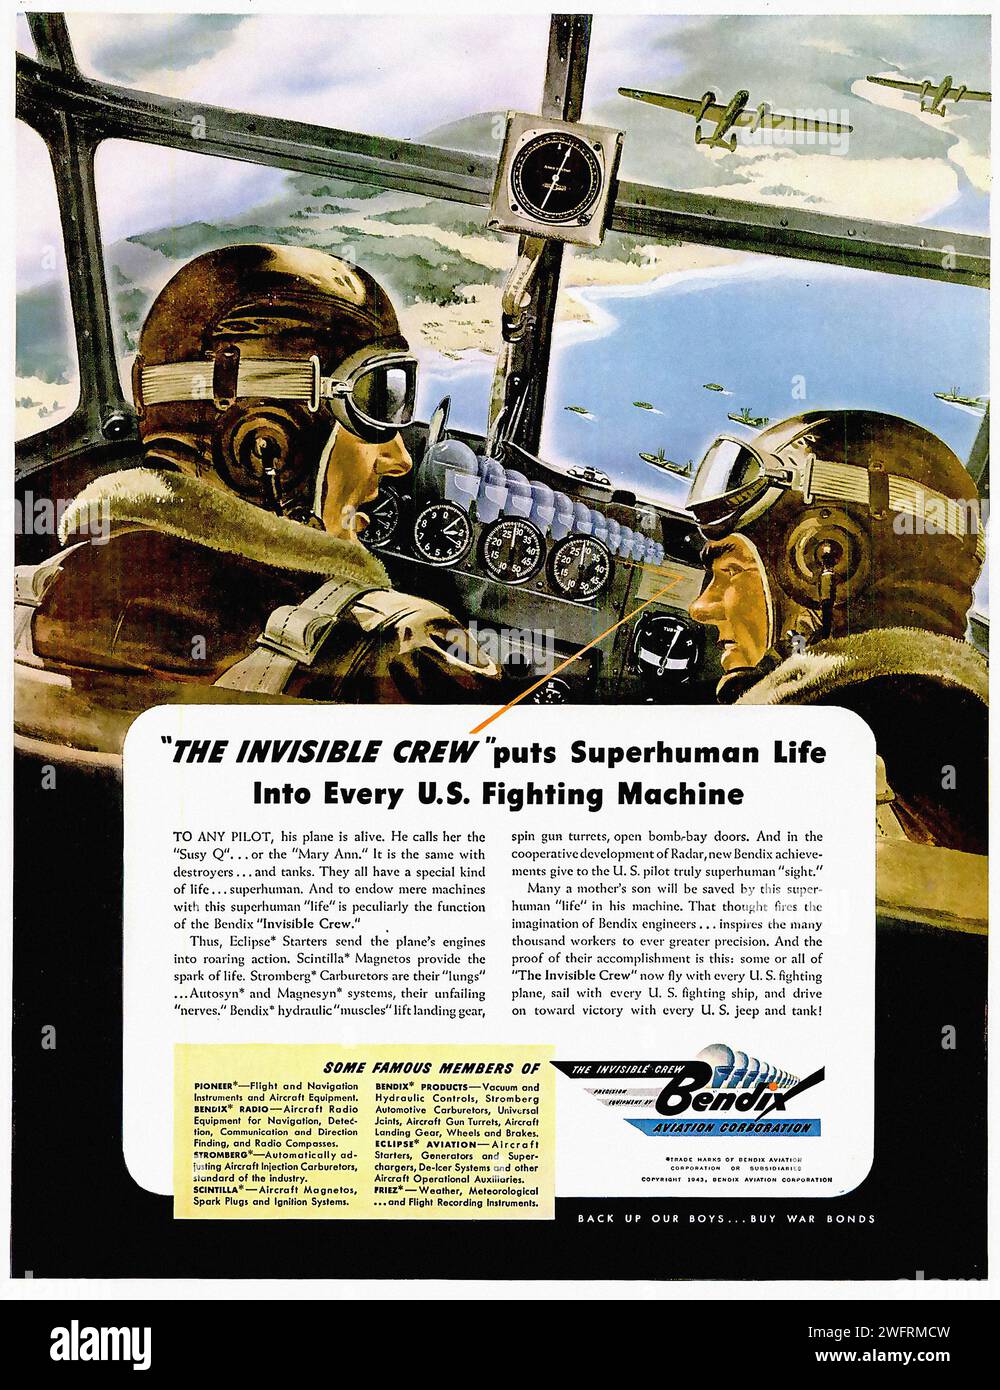 “THE INVISIBLE CREW PUTS SUPERHUMAN LIFE INTO EVERY U.S. FIGHTING MACHINE” “BACK OUR BOYS…WHAT BONDS BUY”  This is a vintage advertisement for Bendix Aviation Corporation, dating back to the World War II era. The advertisement features an illustration of two pilots in the cockpit of a fighter plane, wearing leather helmets and goggles. The cockpit is filled with various dials and gauges, and the background shows a blue sky and clouds, with other fighter planes in the distance. The text on the advertisement discusses the invisible crew that puts superhuman life into every U.S. fighting machine Stock Photo